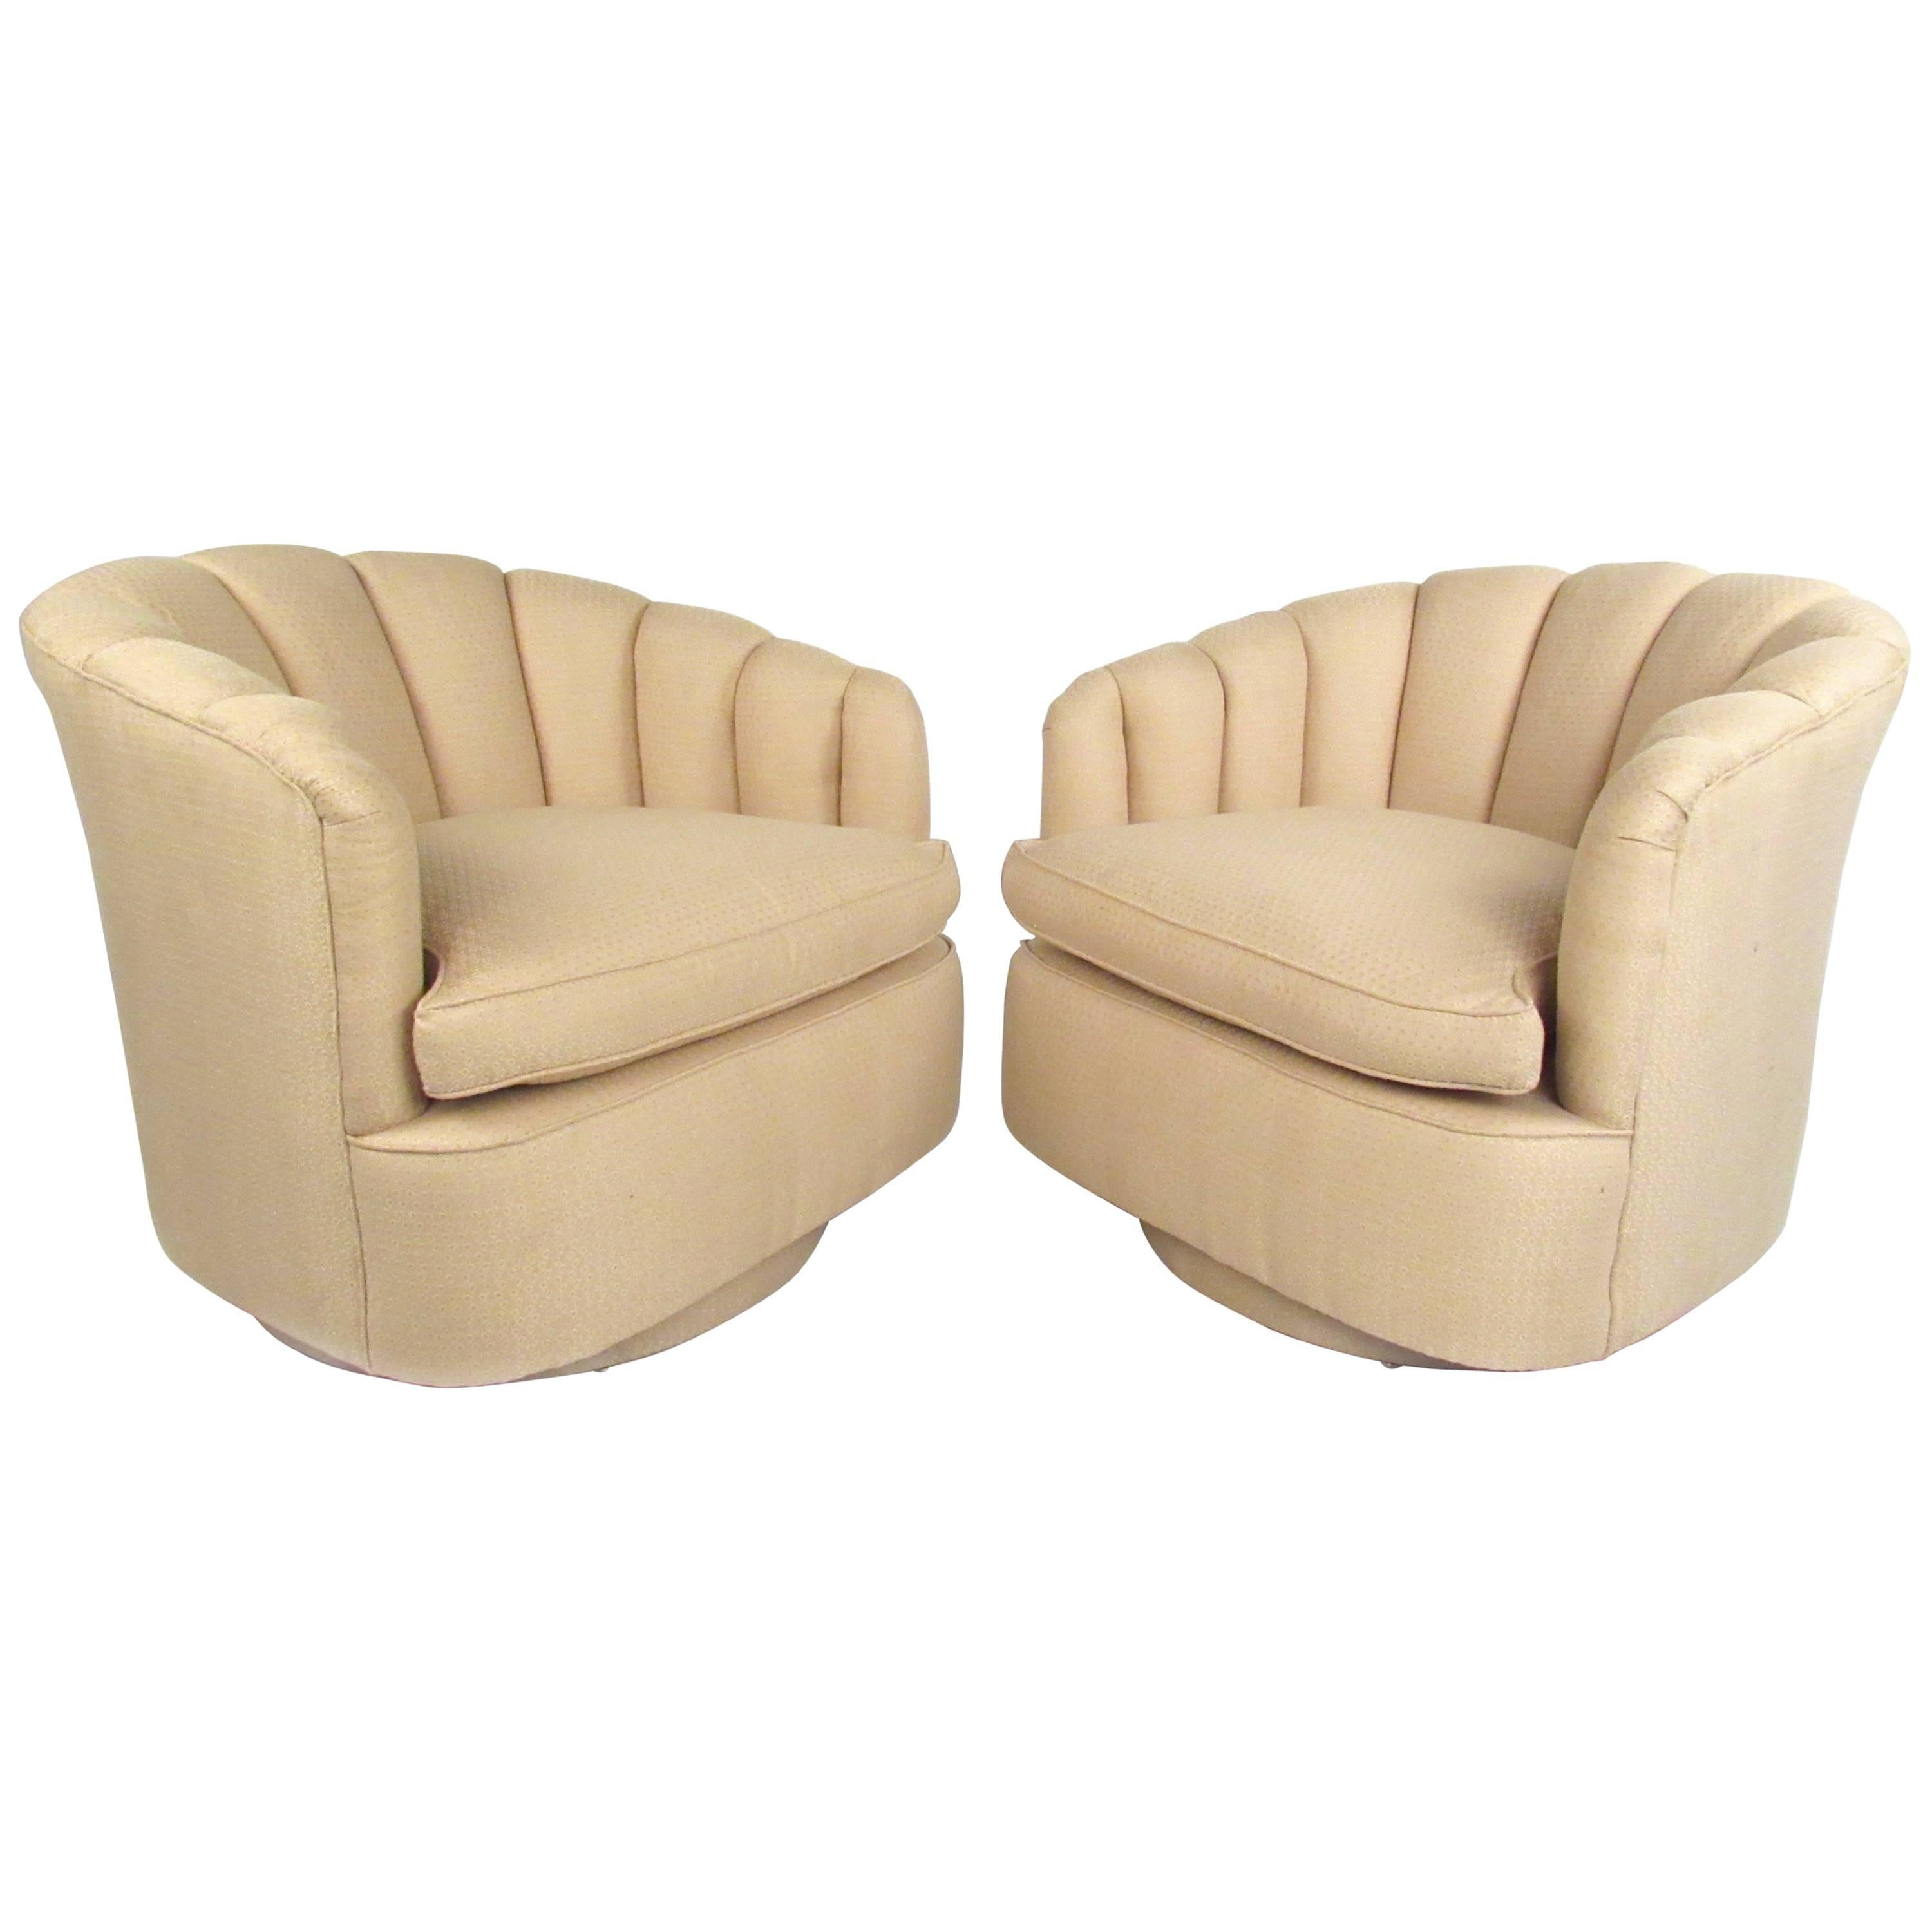 Pair of Contemporary Modern Scalloped Swivel Lounge Chairs